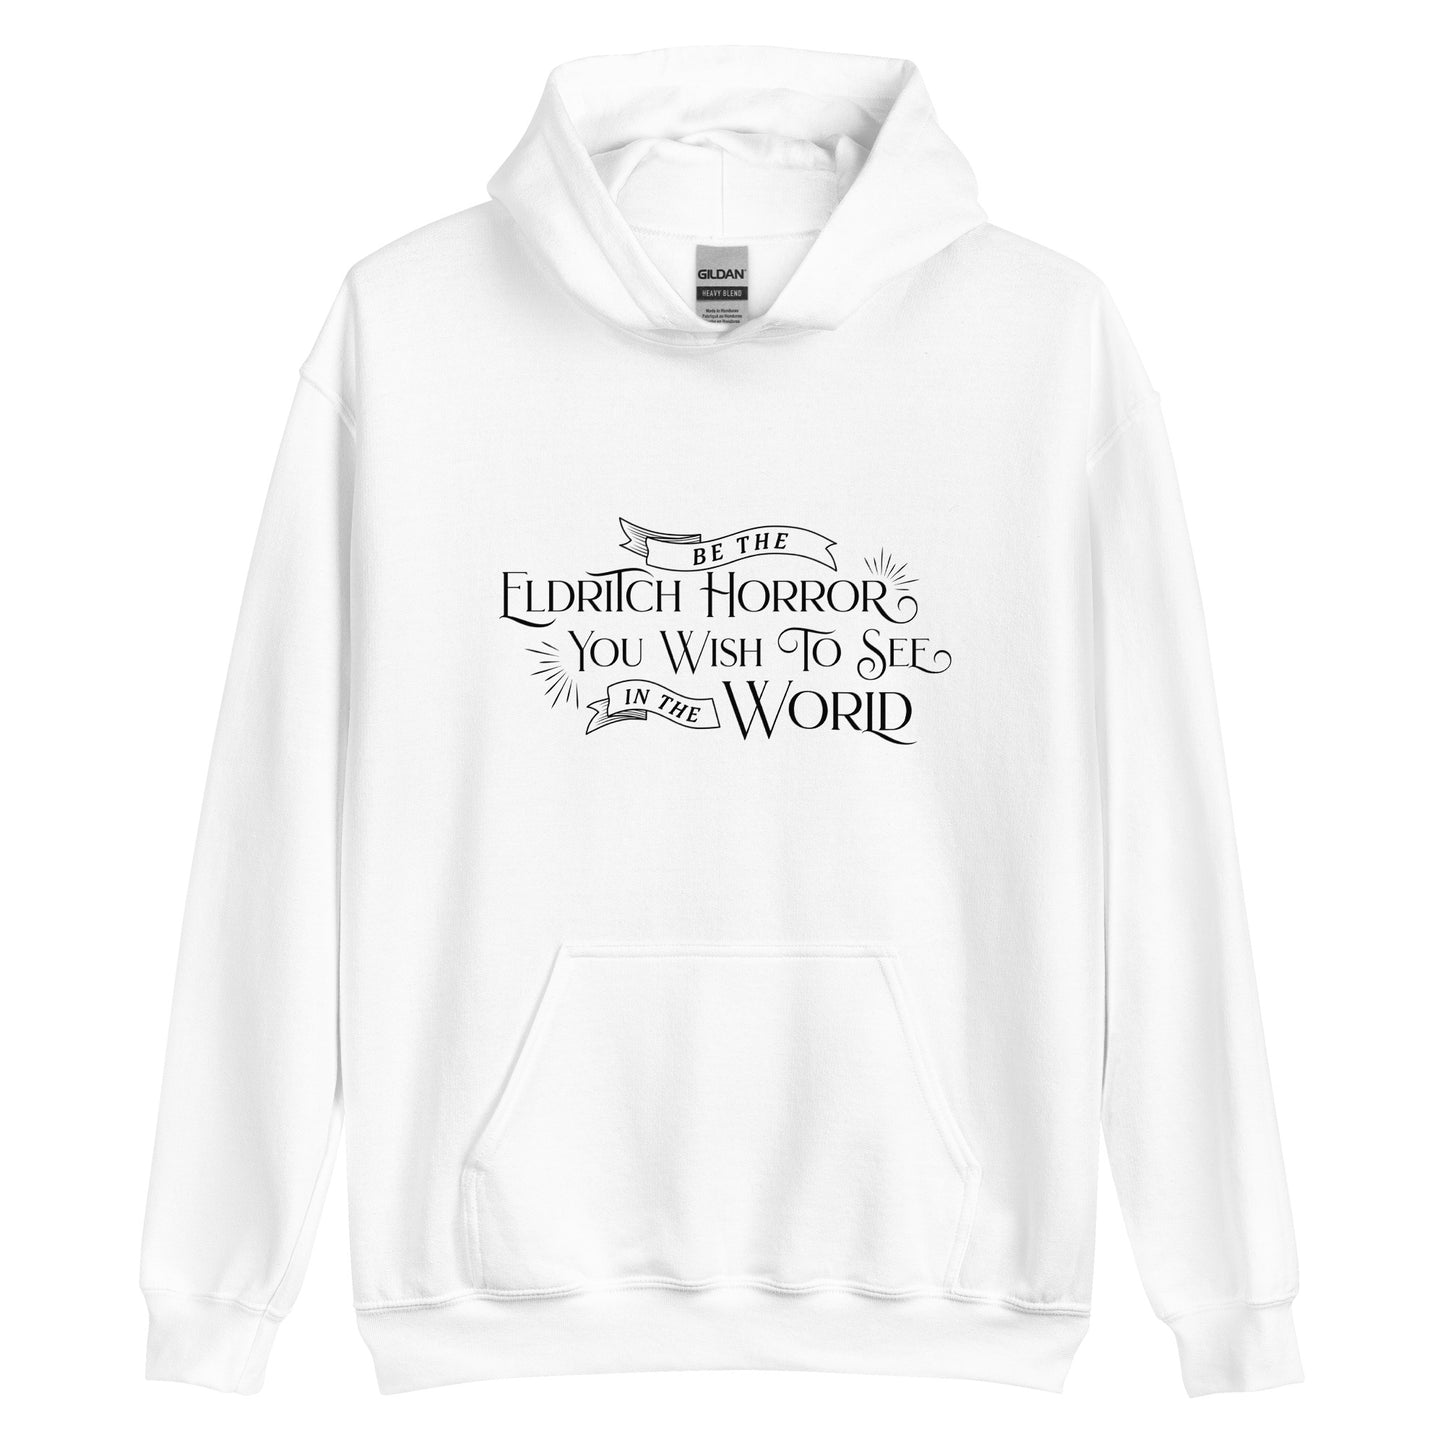 A white hooded sweatshirt featuring black text in an old-fashioned style on the chest. The text reads "Be the Eldritch Horror You Wish To See In The World".